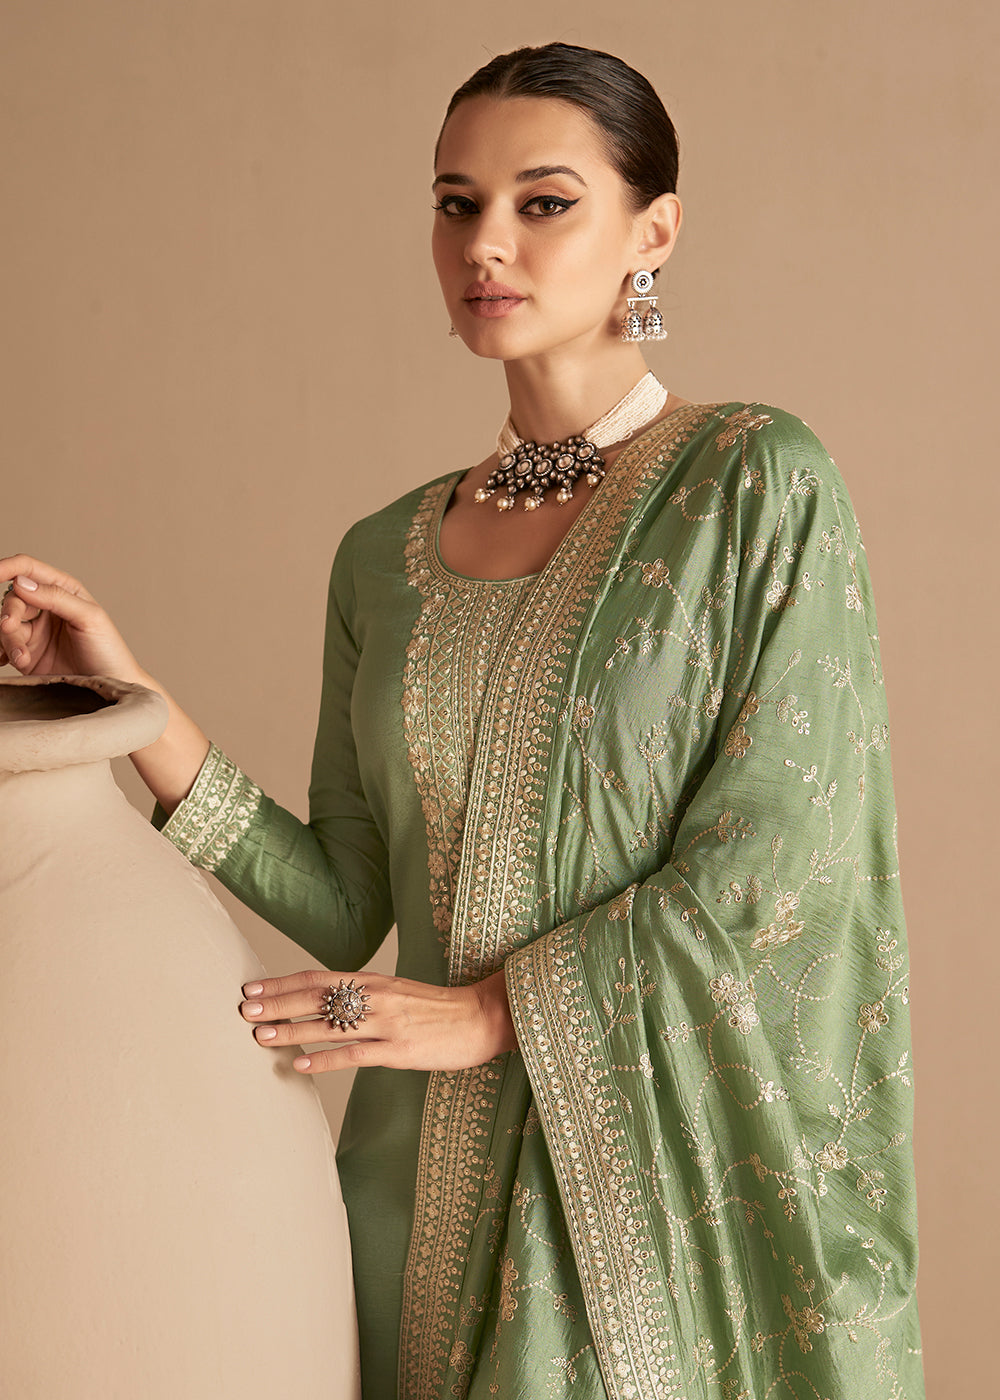 Buy Now Beautiful Soft Green & Gold Embroidered Premium Silk Salwar Suit Online in USA, UK, Canada, Germany, Australia & Worldwide at Empress Clothing. 